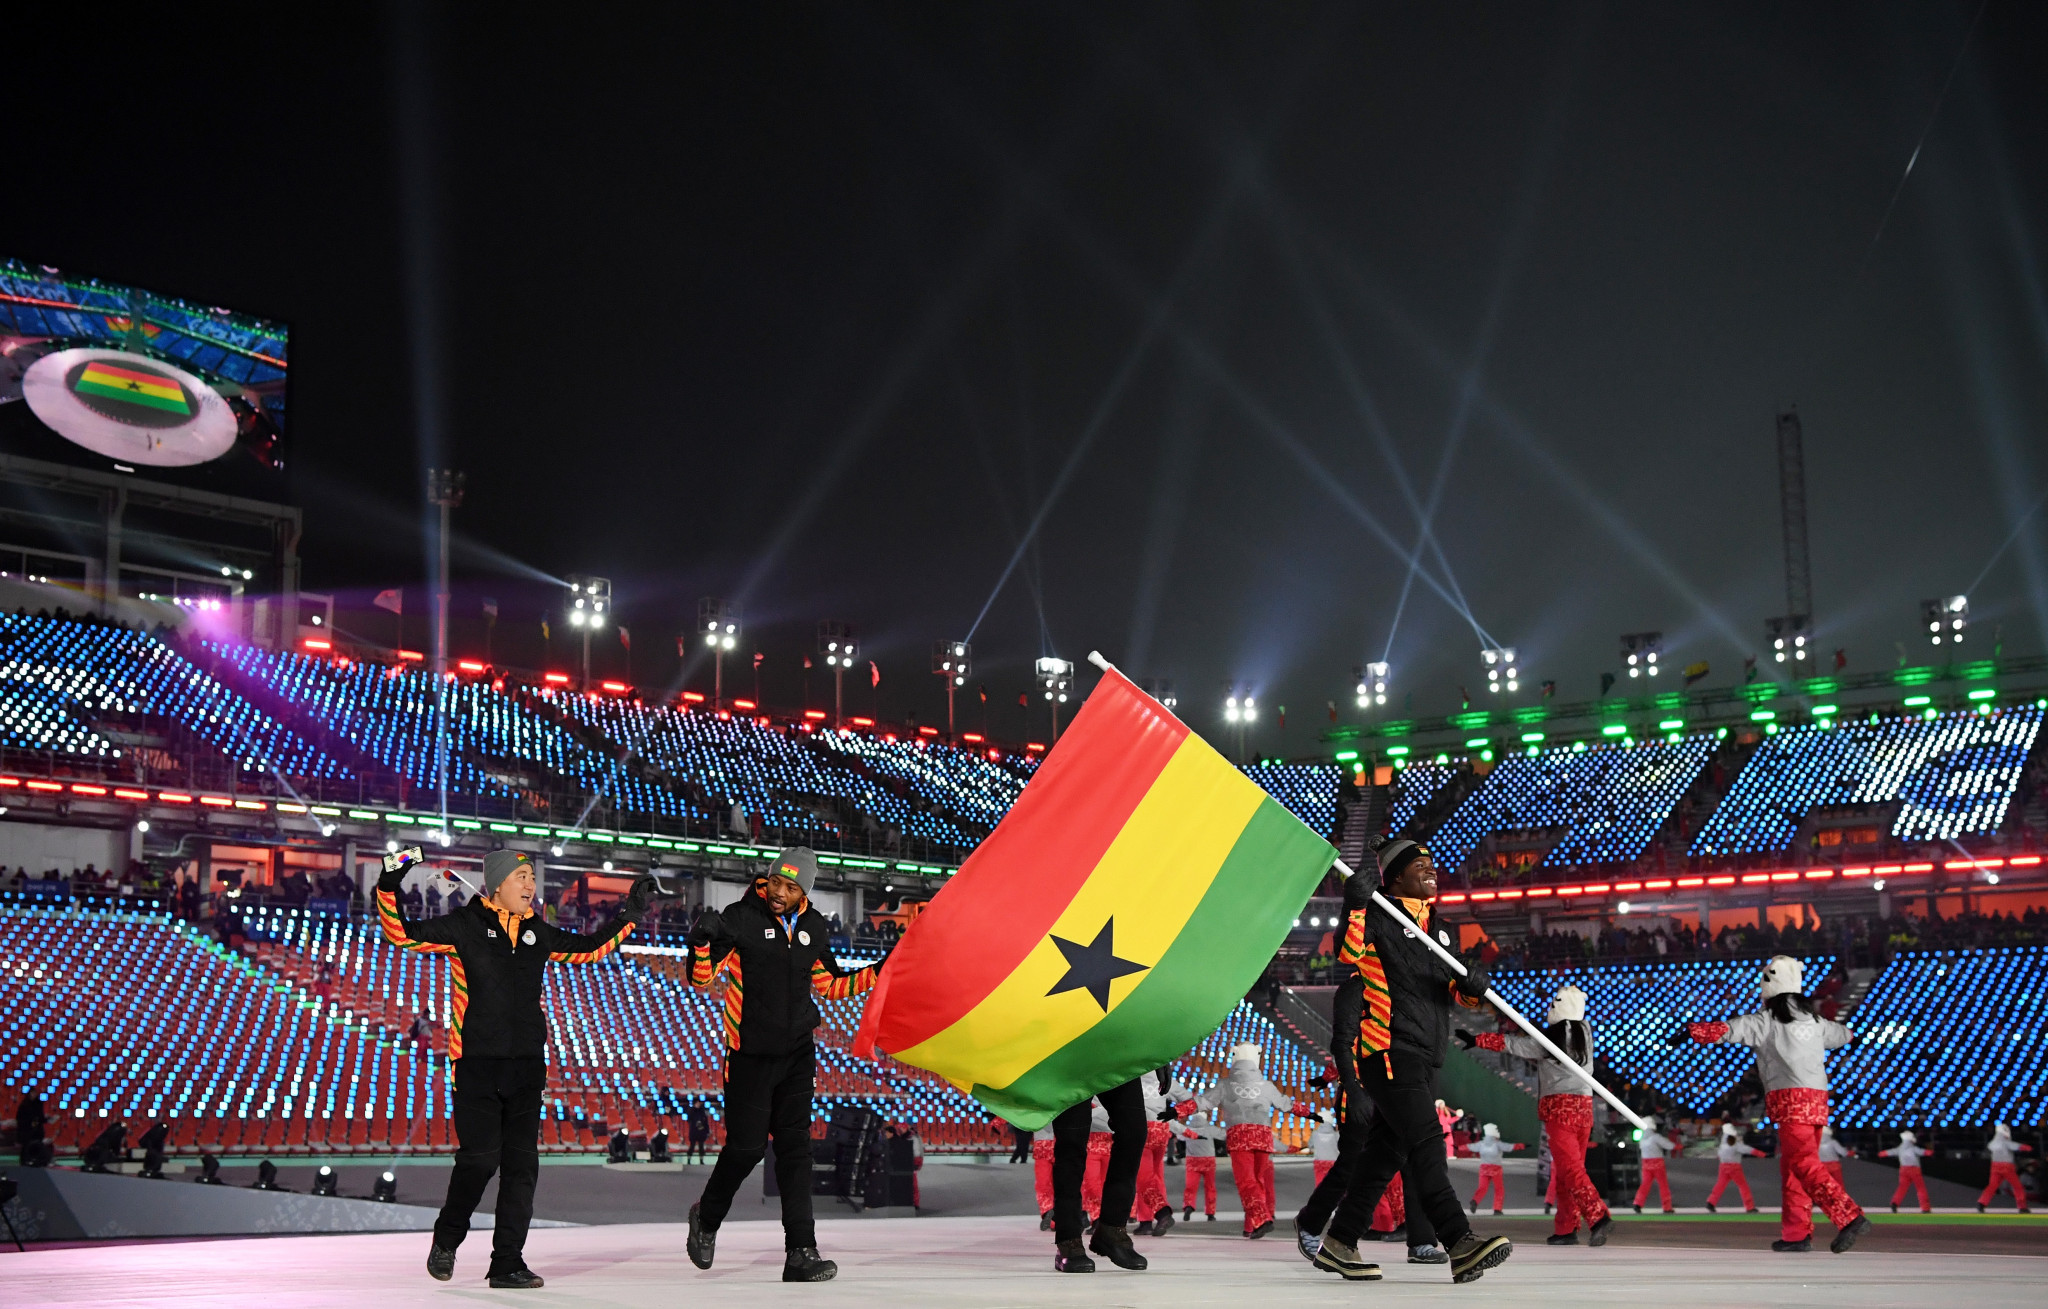 Ghana has won four Olympic medals in its history ©Getty Images